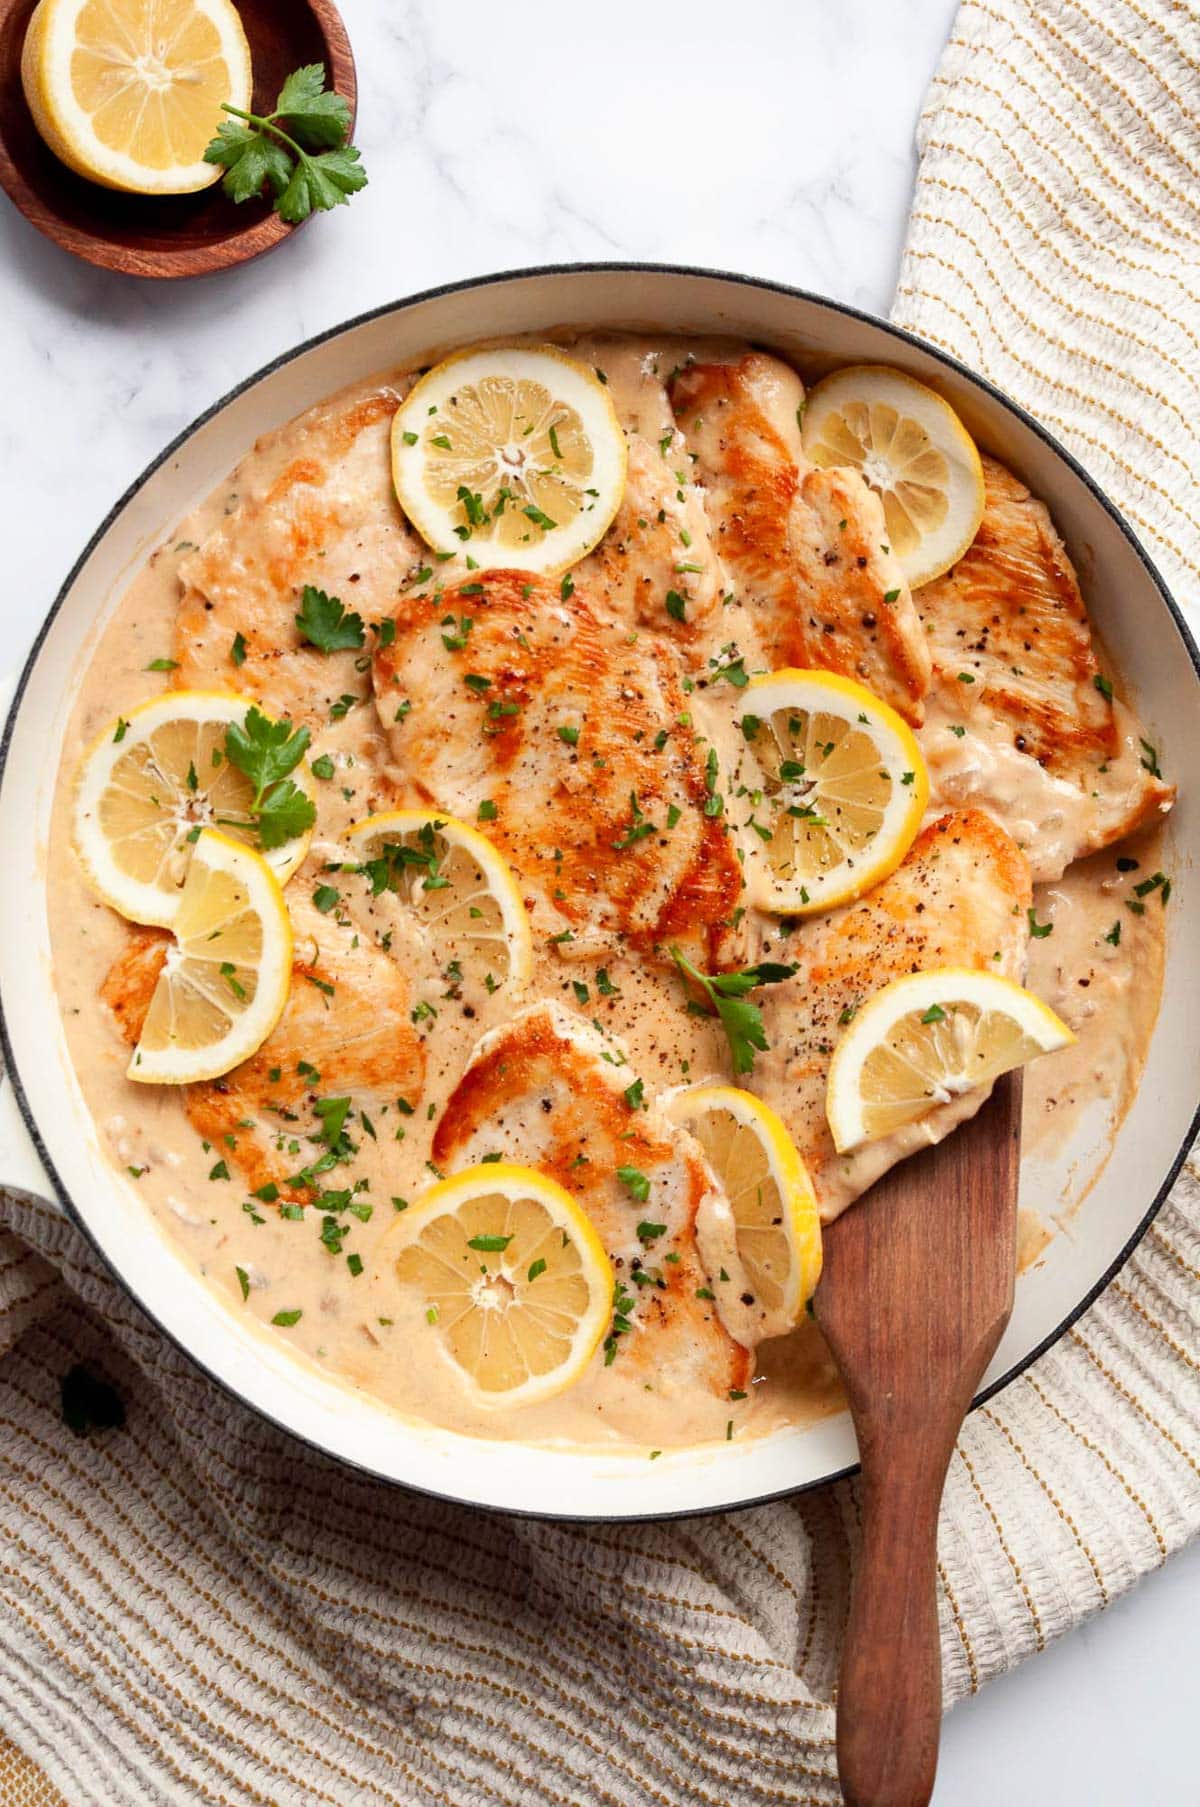 Lemon garlic chicken in creamy sauce served in white skillet with a wooden spoon.